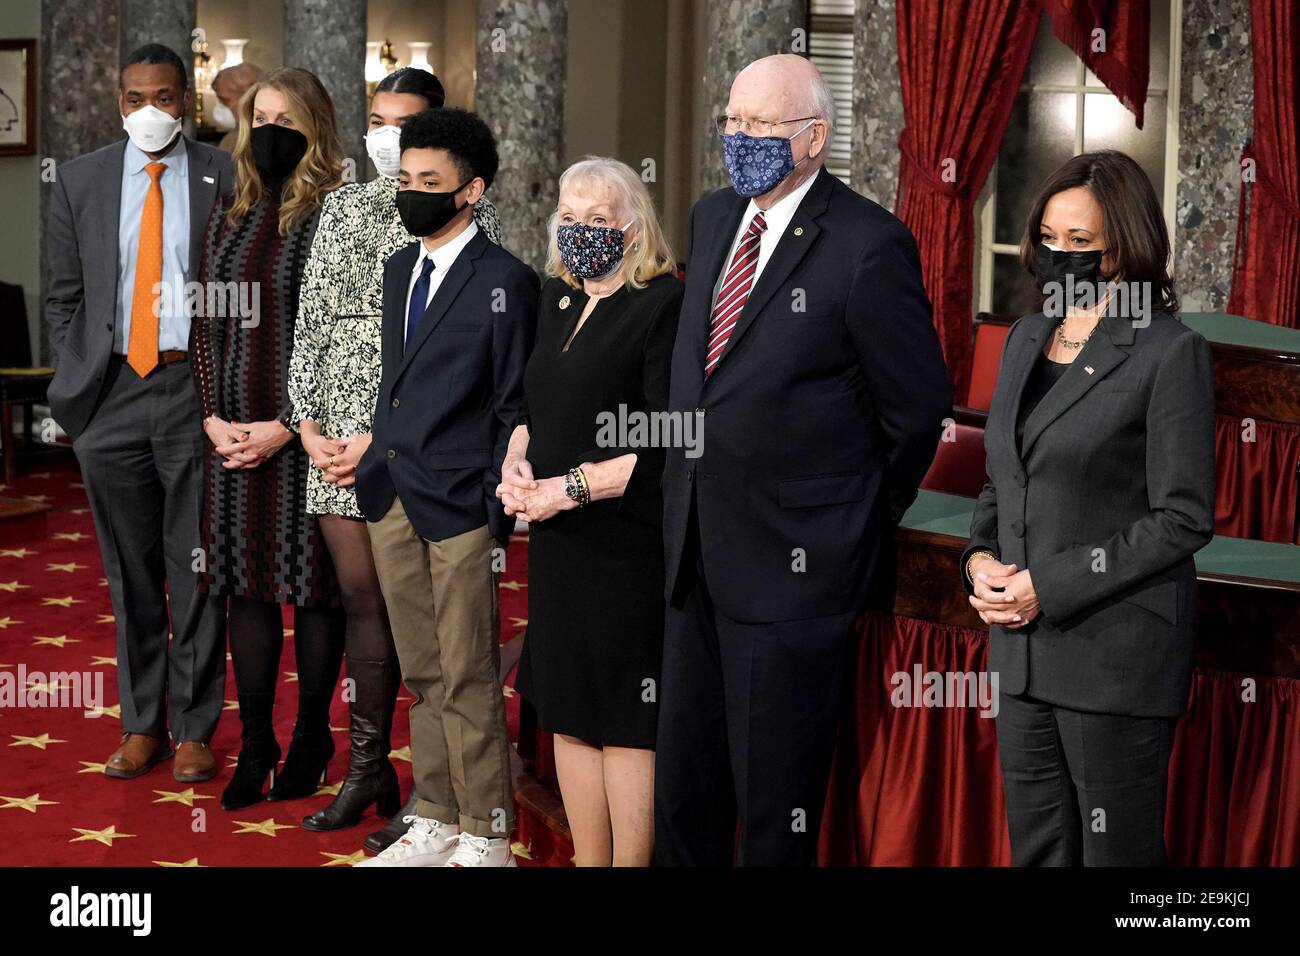 Sen. Patrick Leahy (D-Vt.) and Vice President Kamala Harris, far right, take a photo with Leahy’s family after a ceremonial swearing in photo op on Thursday, February 4, 2021 in the Old Senate Chamber at the U.S. Capitol in Washington, D.C. From left son-in-law Lawrence Jackson, daughter Alicia Leahy, granddaughter Sophia Jackson, grandson Patrick Jackson, wife Marcelle Pomerleau, Sen. Patrick Leahy (D-Vt.) and Vice President Kamala Harris.  (Photo by Greg Nash/Pool/Sipa USA) Stock Photo